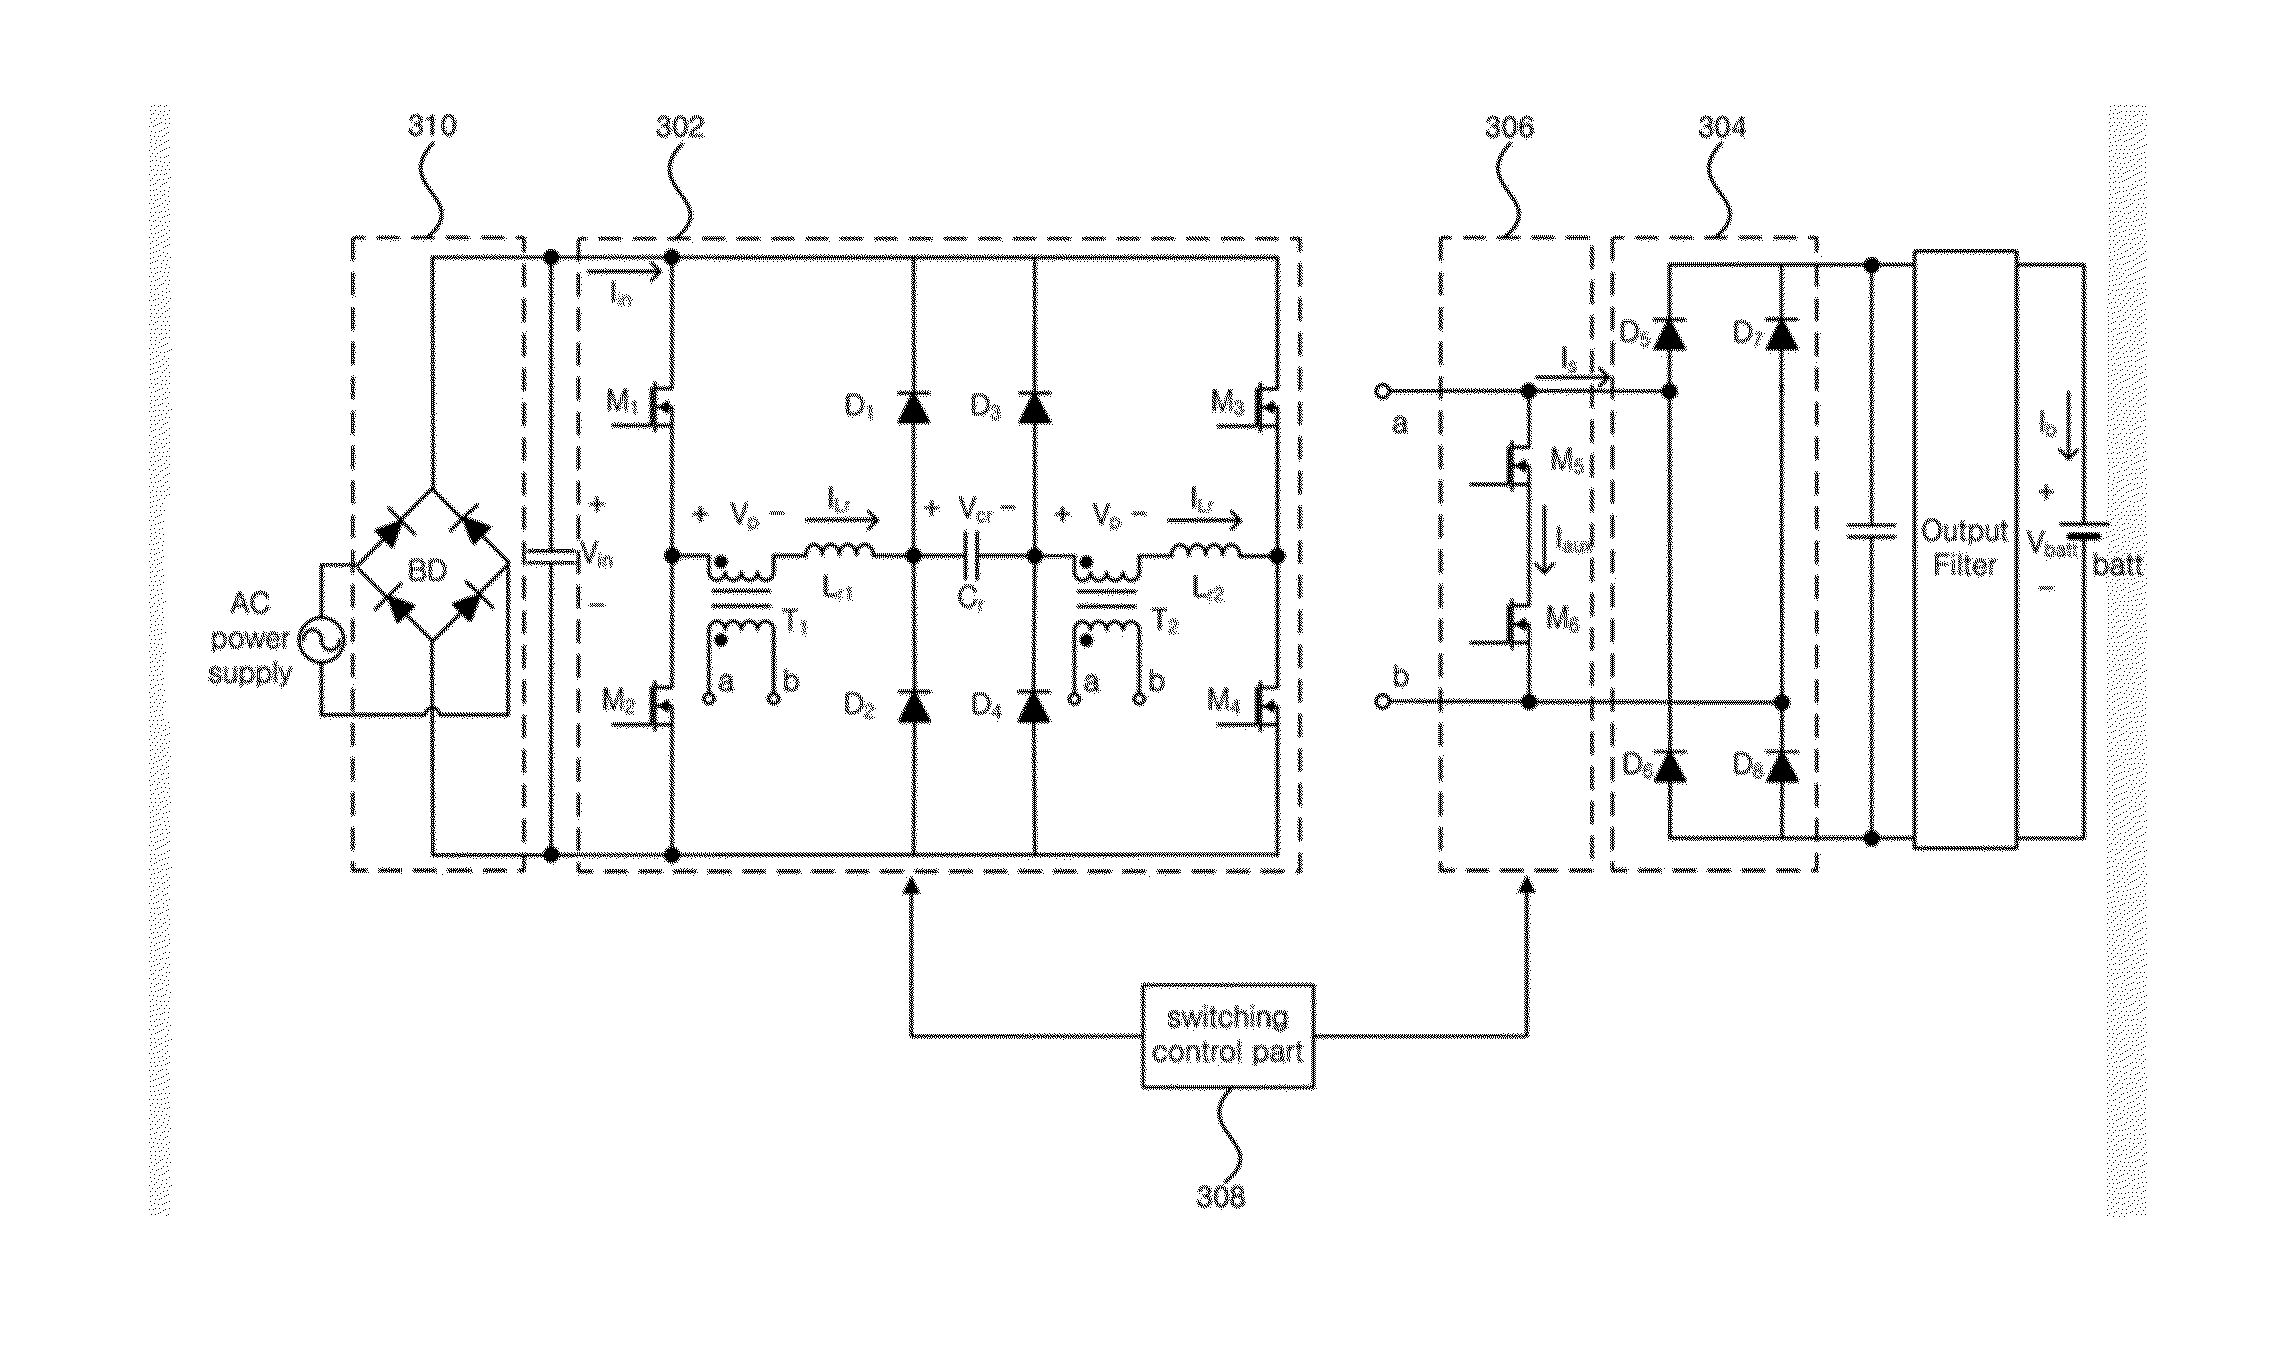 Battery charging device for an electric vehicle